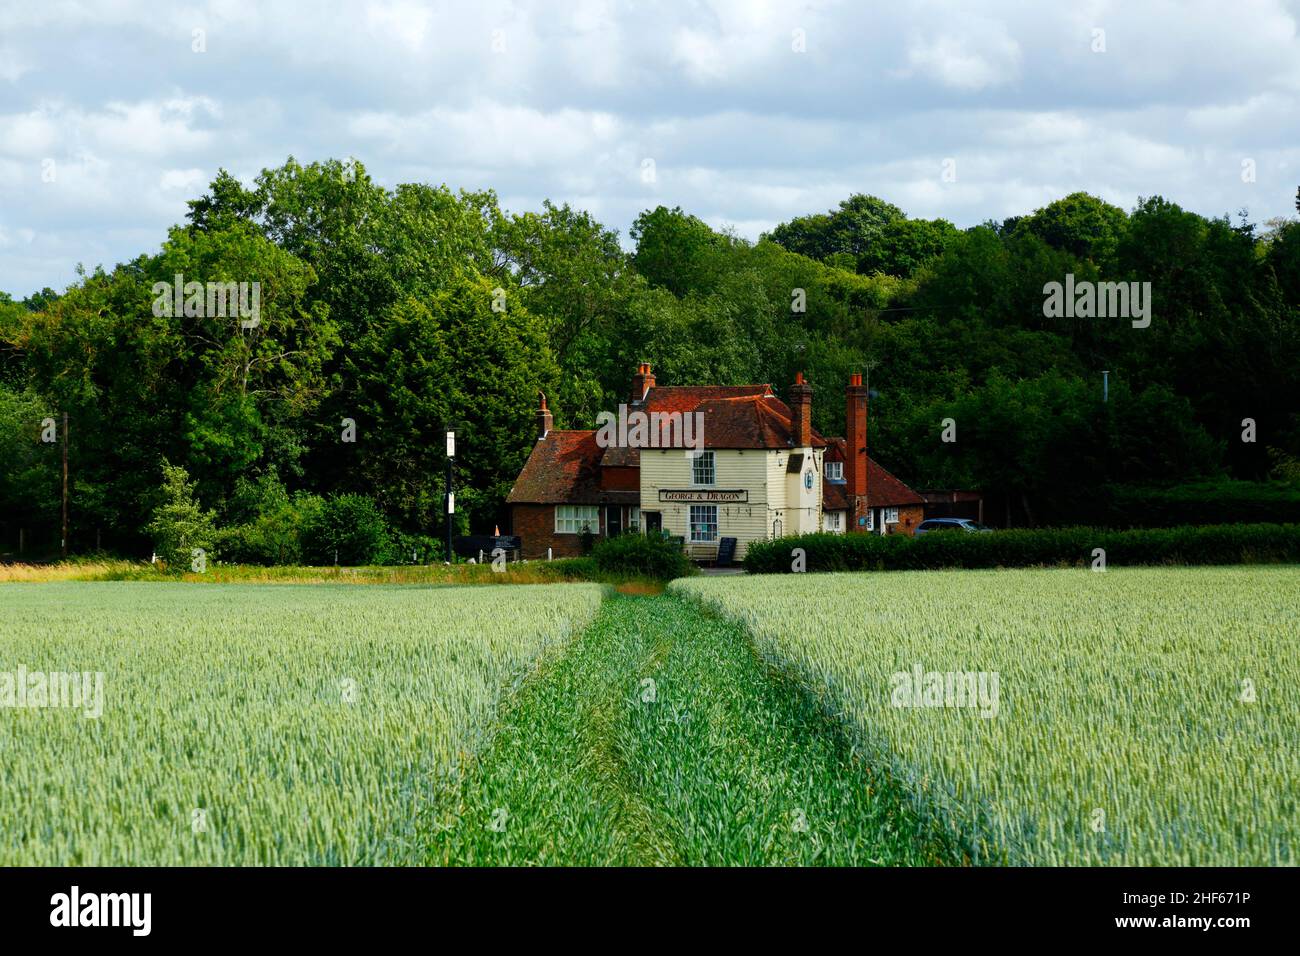 Field of young wheat in early summer and the George & Dragon At Tudeley public house on Five Oak Green Road between Tudeley and Capel, Kent, England Stock Photo